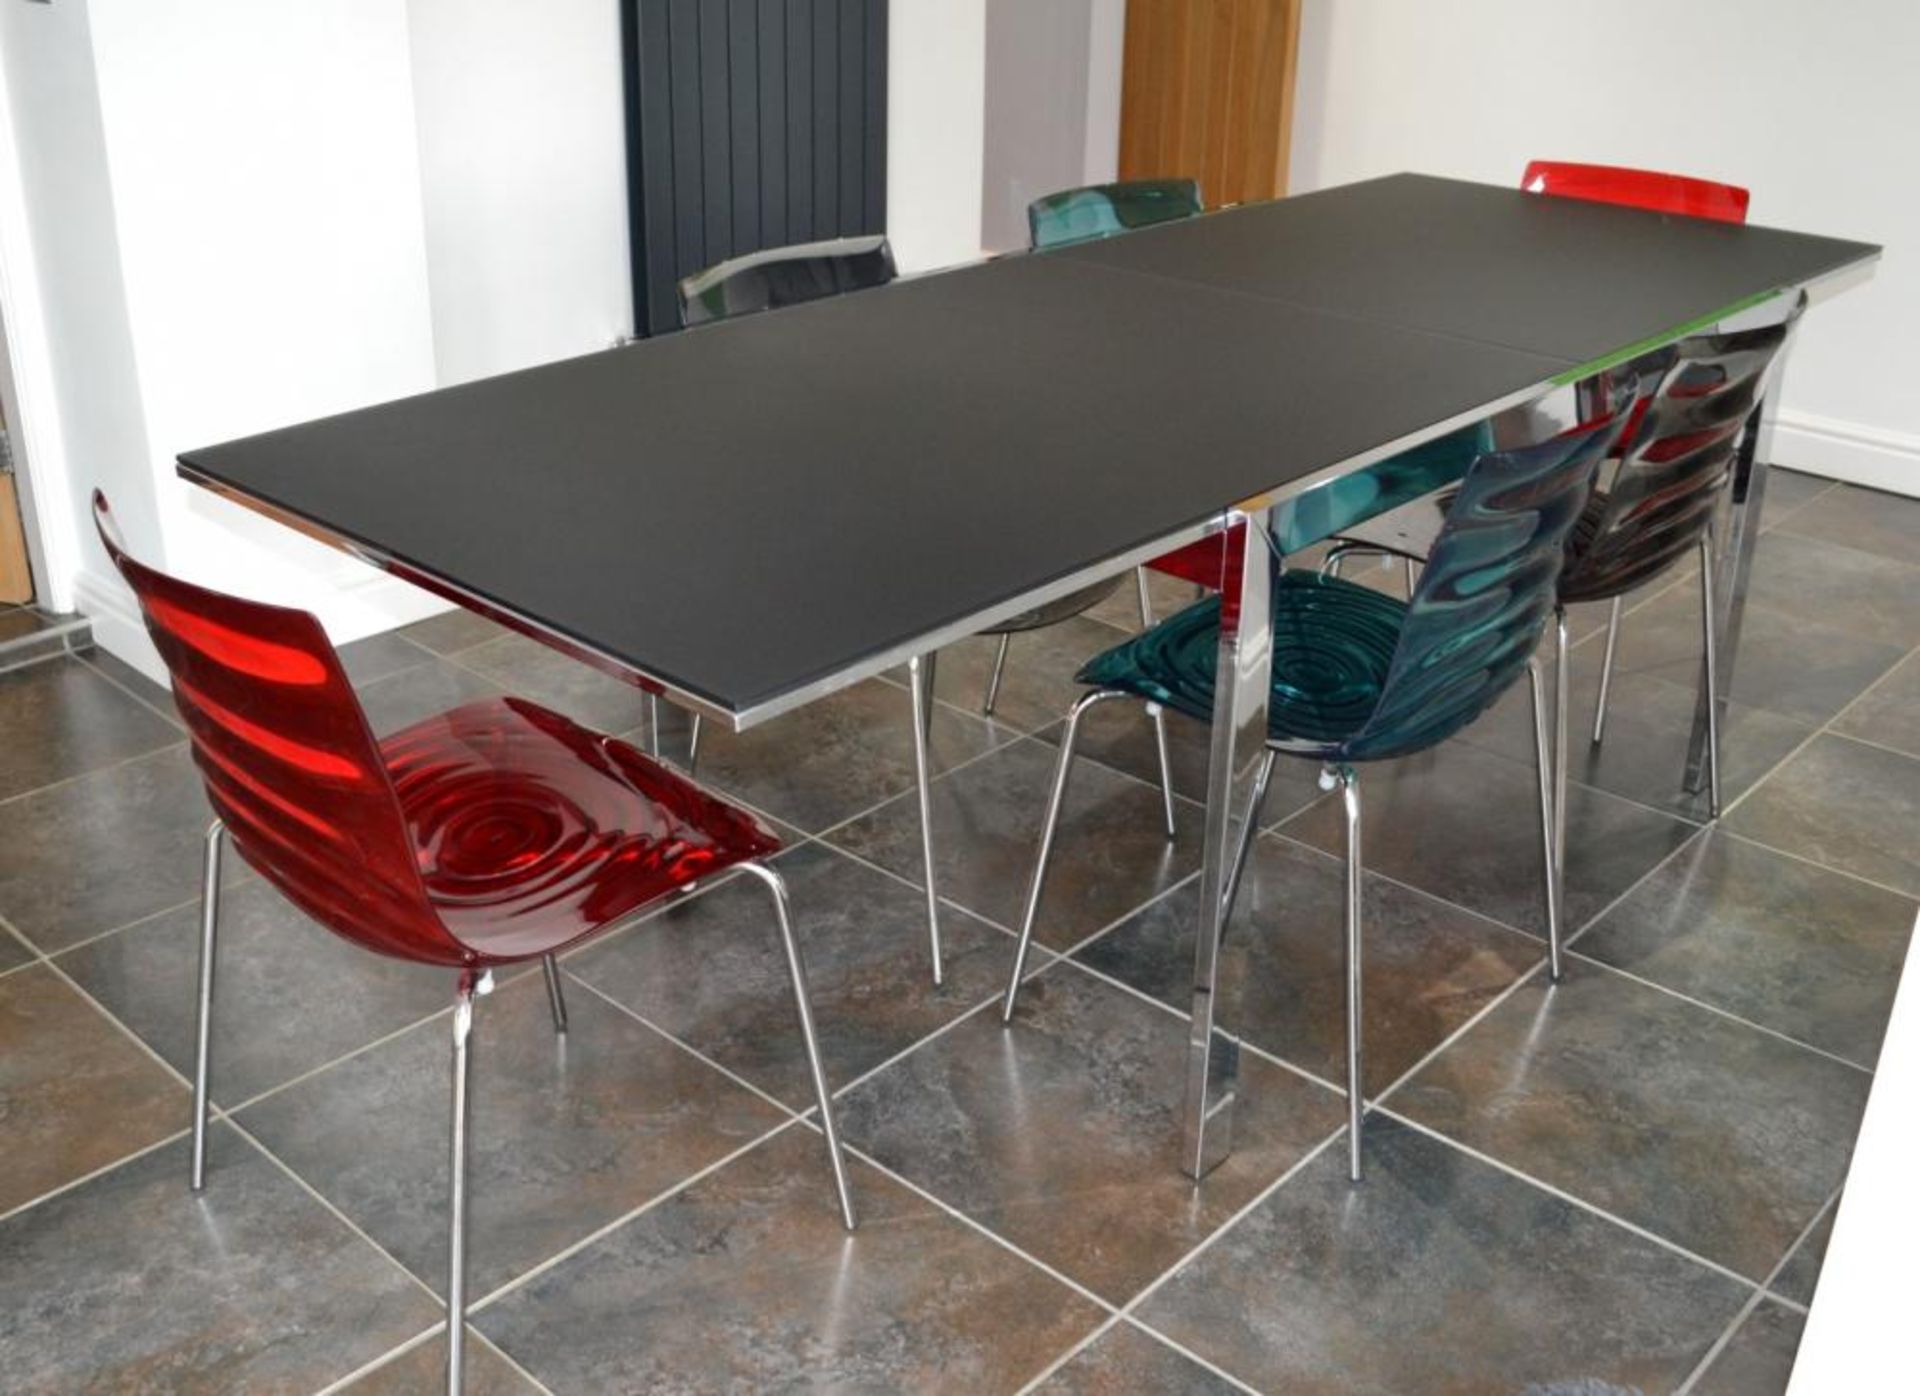 1 x Contemporary Calligaris Frosted Black Glass Extending Dining Table With 6 L&#39;Eau Chairs - CL2 - Image 3 of 14